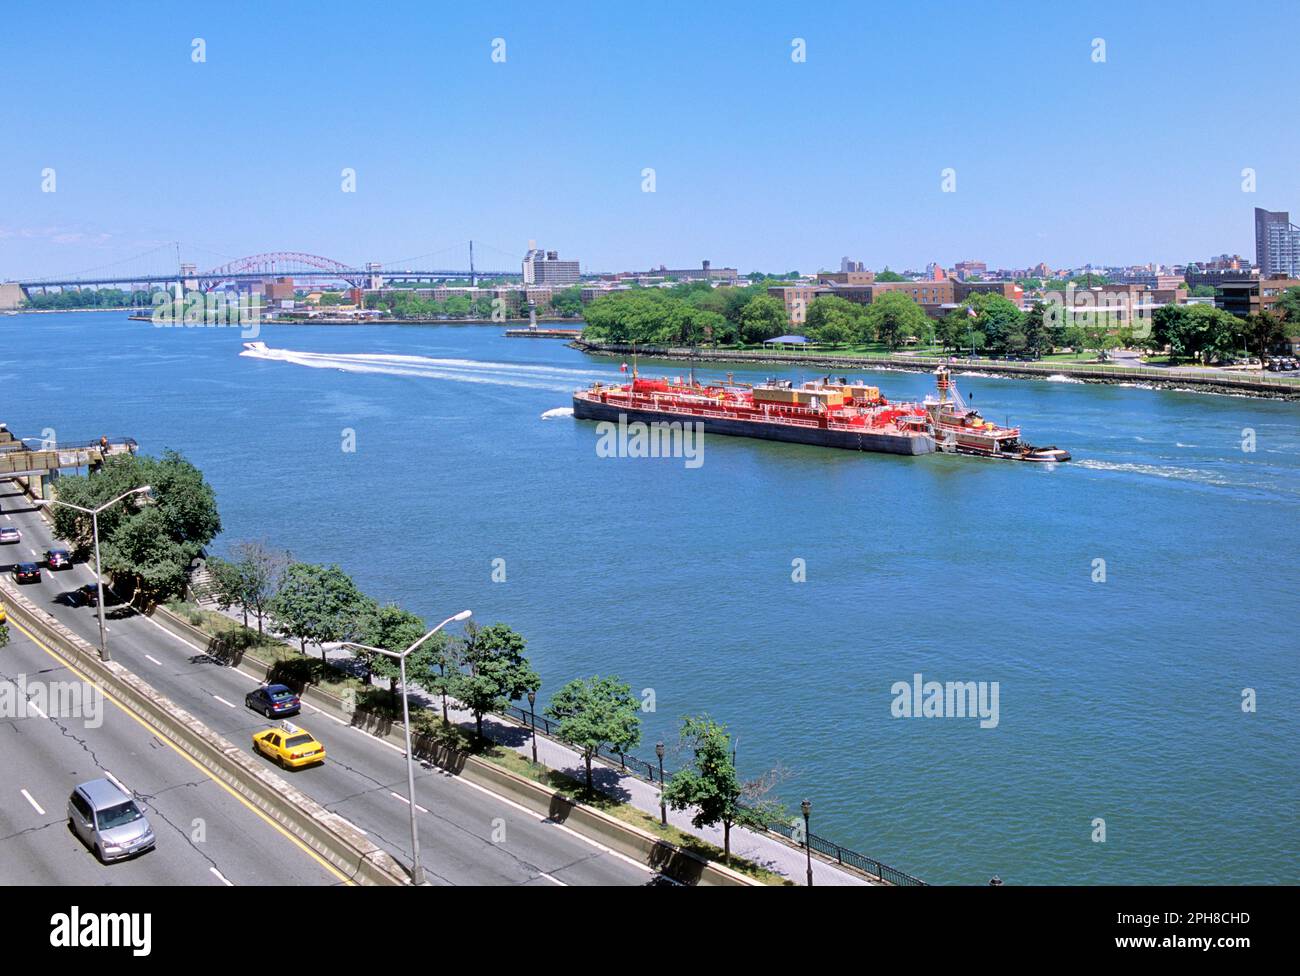 Tugboat and red barge on the East River. Upper East Side high angle view of commercial river traffic on the FDR Drive in New York City USA Stock Photo